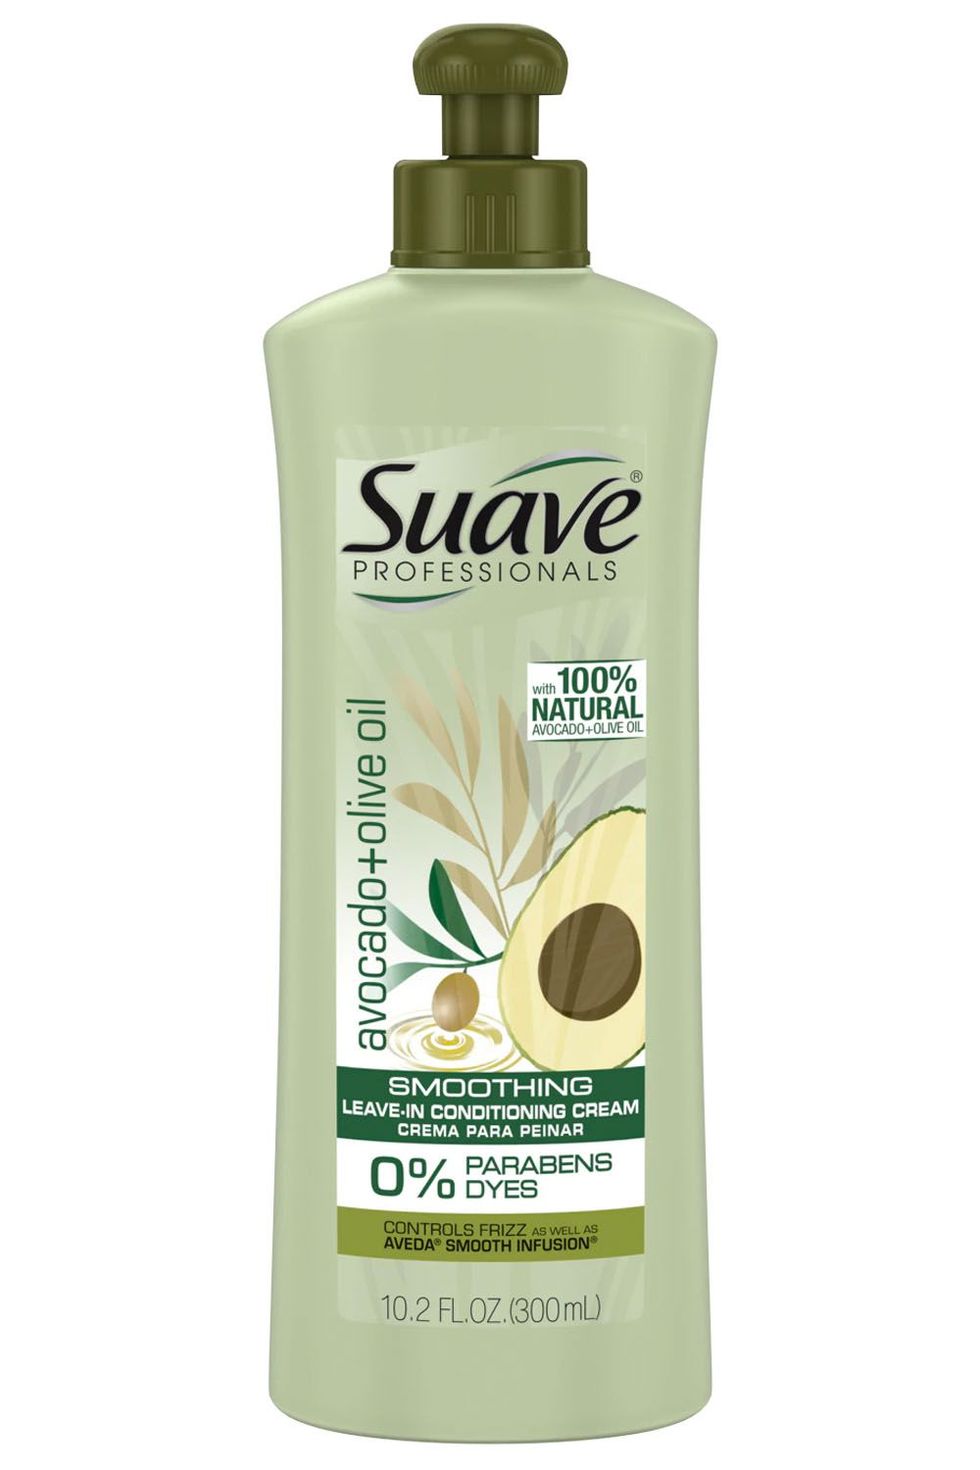 Suave Professionals Avocado and Olive Oil Leave-in Conditioner